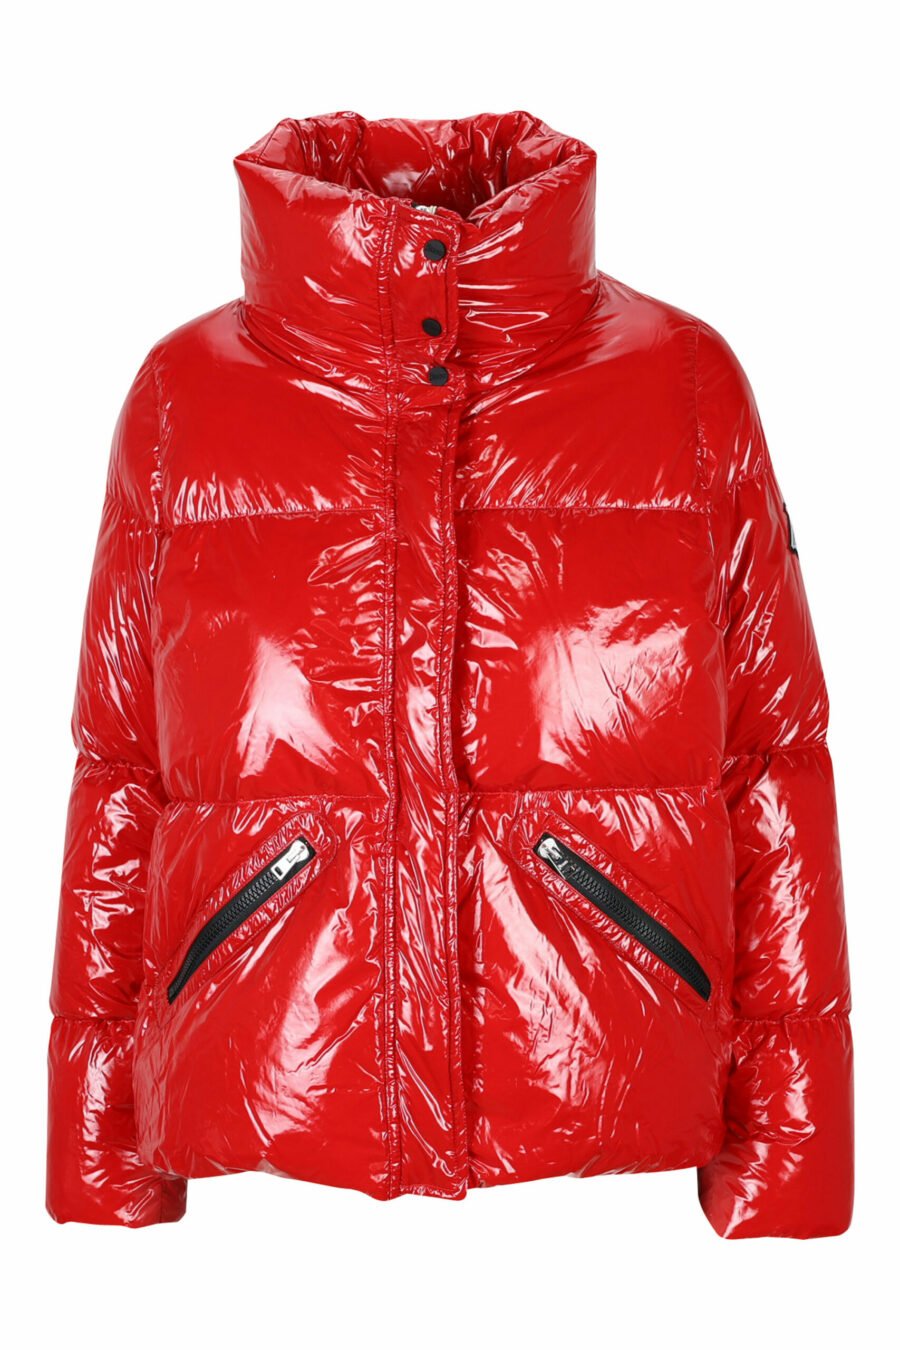 Red bomber jacket "gloss" - 8055721719696 scaled